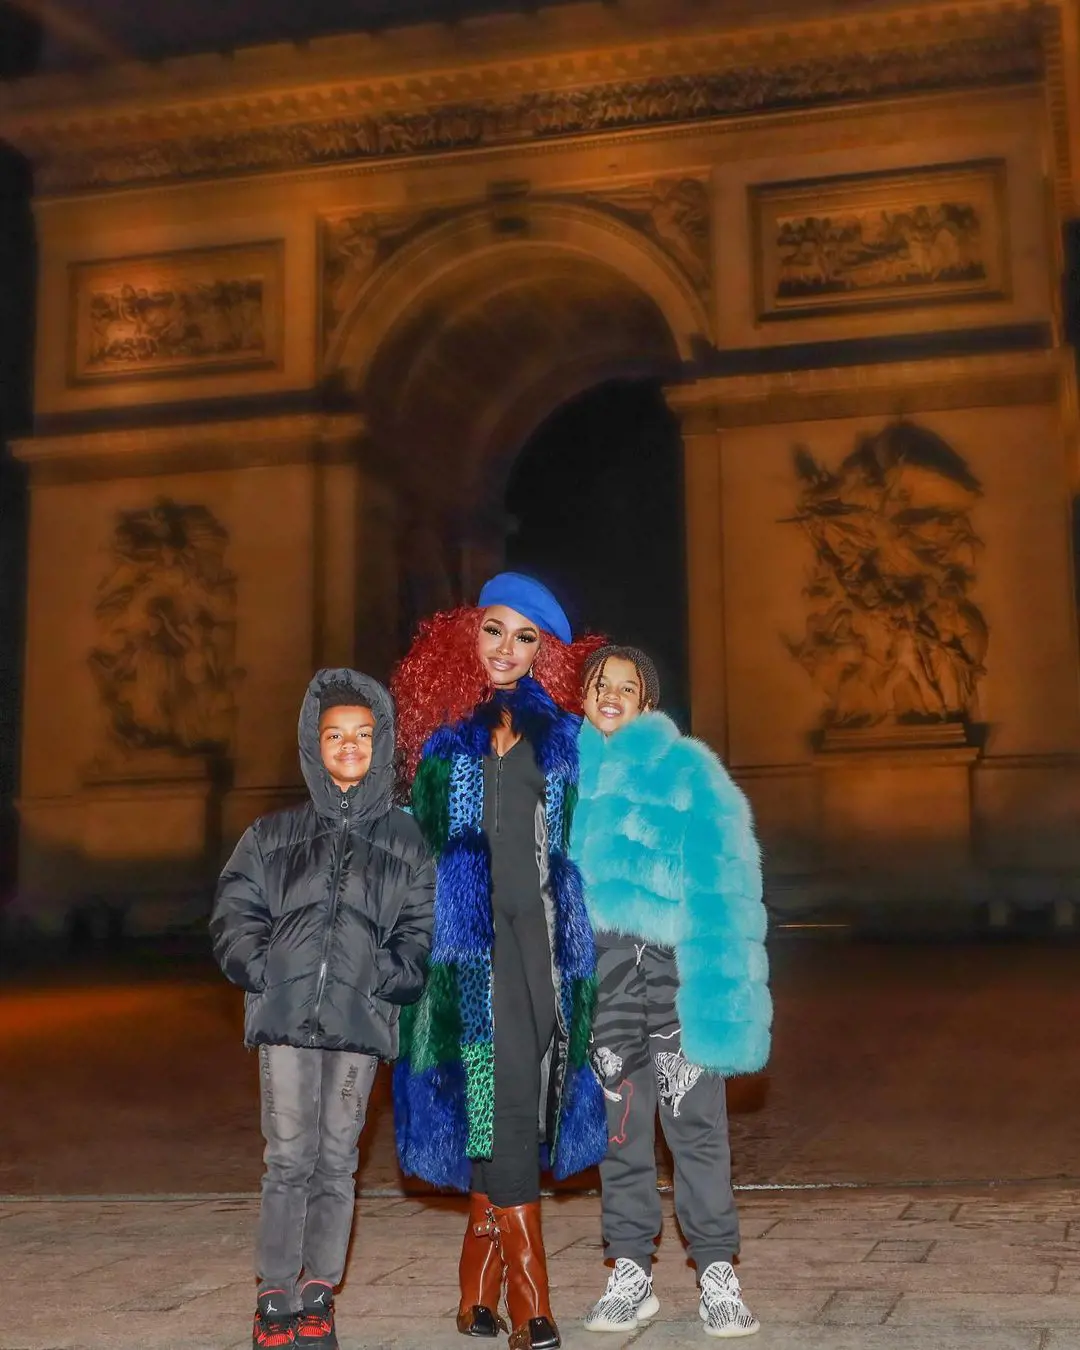 Phaedra And Her Children Dylan And Ayden(right) At Arc De Triomphe, Paris On 28 November 2022